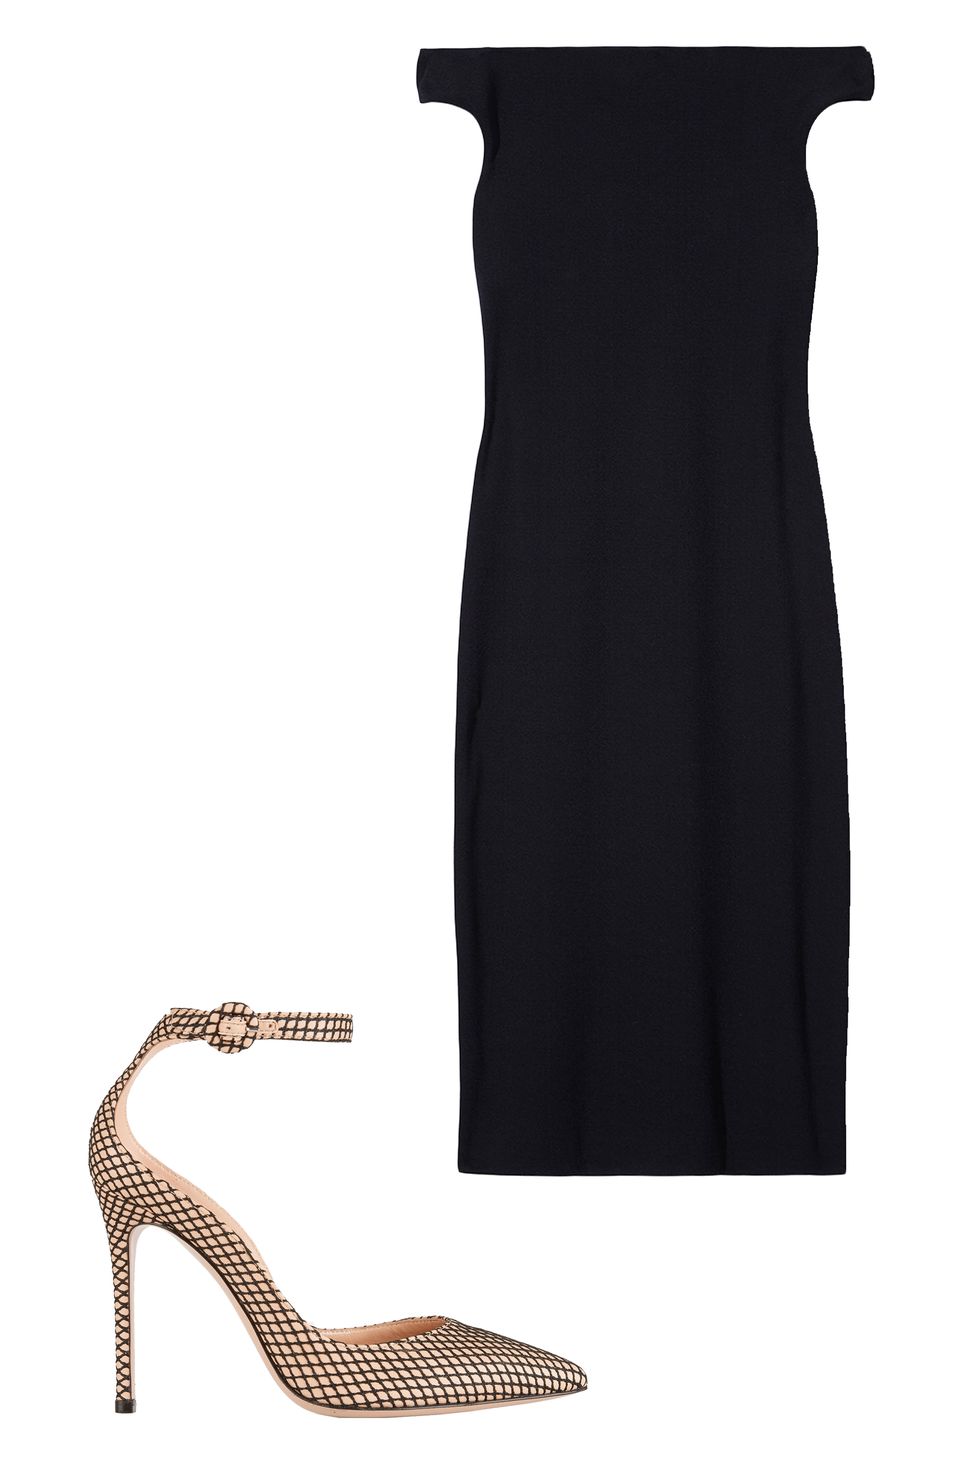 <p>Never leave home without a sophisticated LBD. It stands alone, or you can slip a lightweight knit on top to turn it into a pencil skirt. <em>Tibi Off-the-Shoulder Midi Dres</em><em>s, $425, <strong><a href="https://shop.harpersBAZAAR.com/designers/t/tibi/off-the-shoulder-midi-dress-6083.html" target="_blank">shopBAZAAR.com</a>; </strong></em><em>Gianvito Rossi Leather and Fishnet Pumps, $845, <strong><a href="https://www.net-a-porter.com/us/en/product/639383/gianvito_rossi/leather-and-fishnet-pumps" target="_blank">netaporter.com</a></strong>.</em></p>